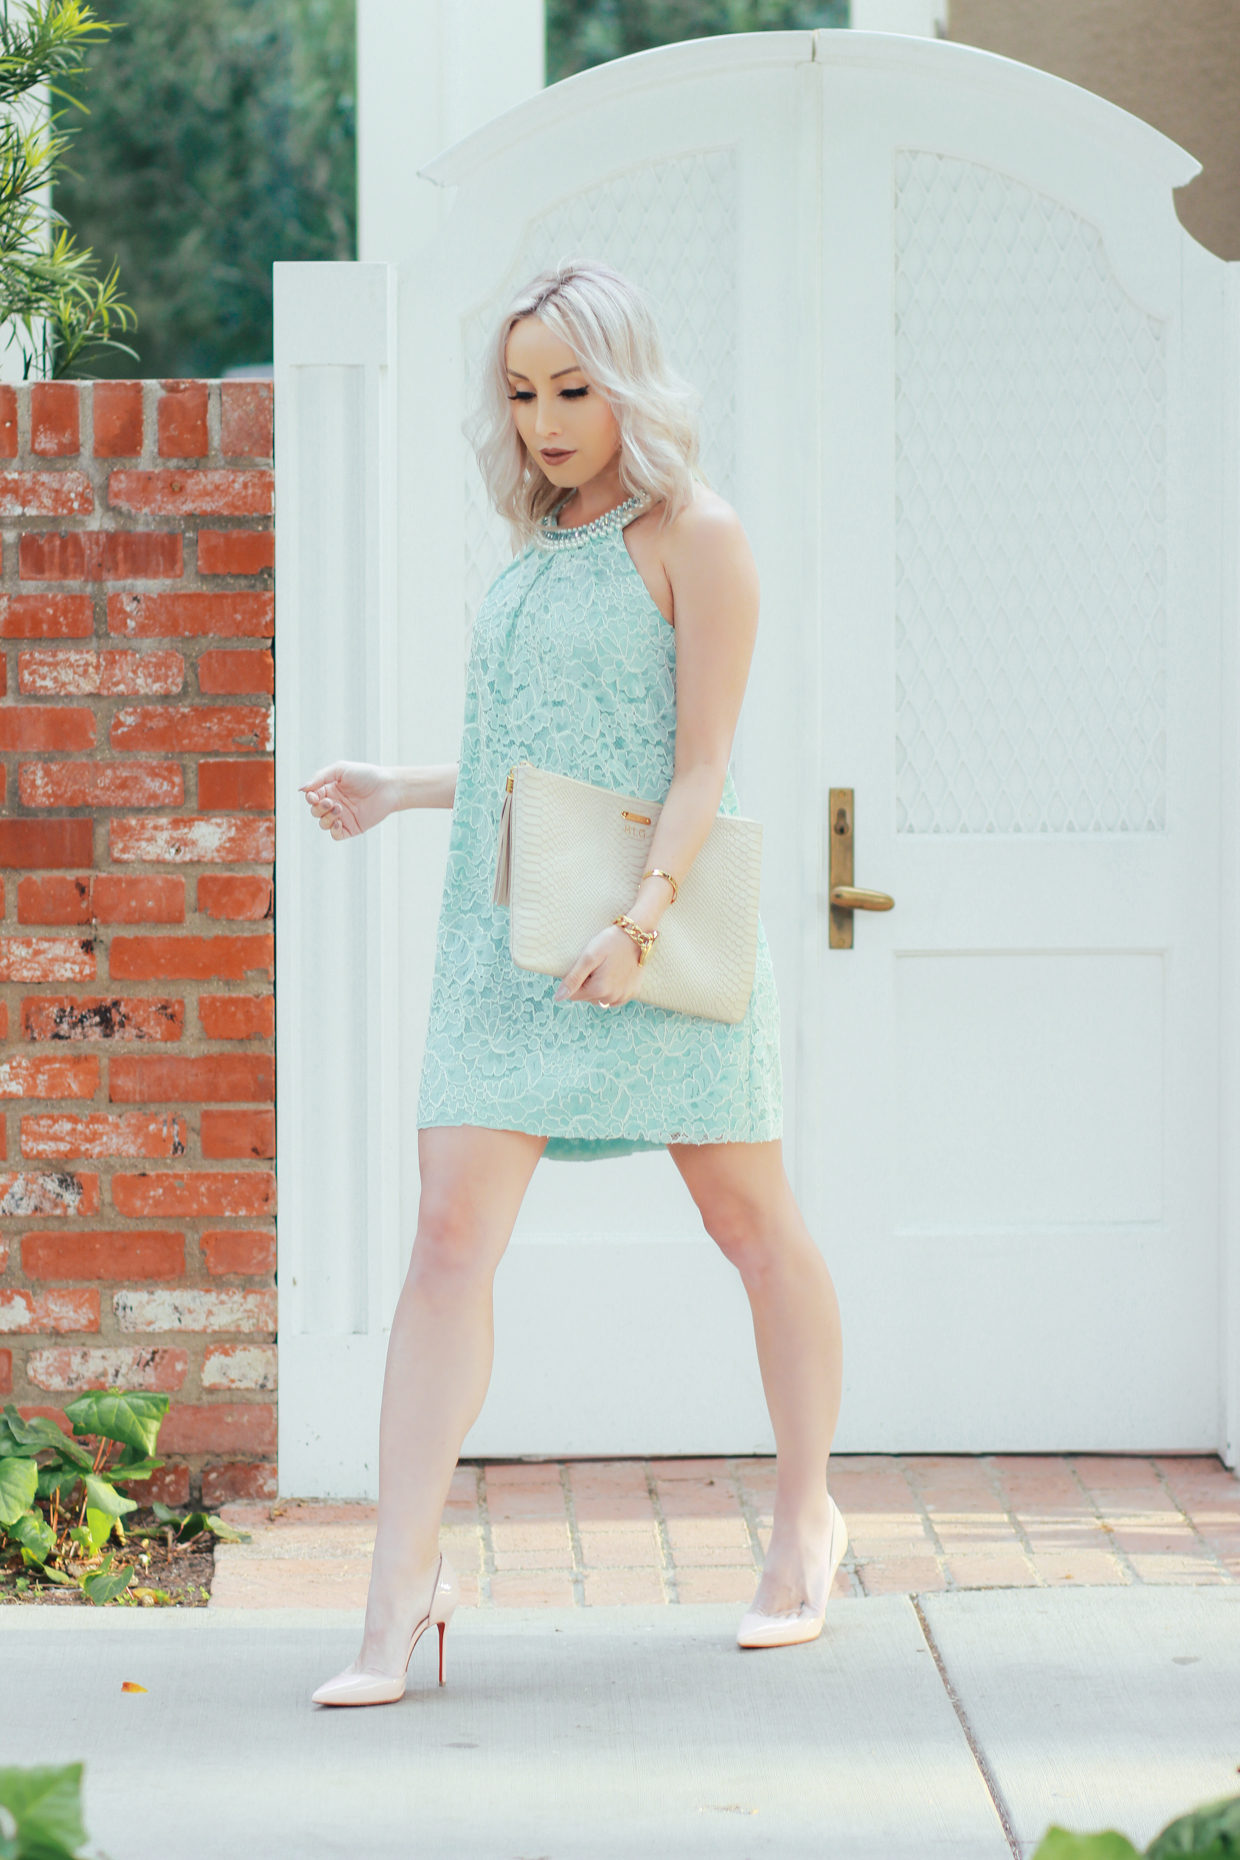 Blondie in the City | Elegant Mint Lace Dress by @maggylondon | Breakfast At Tiffany's Inspired